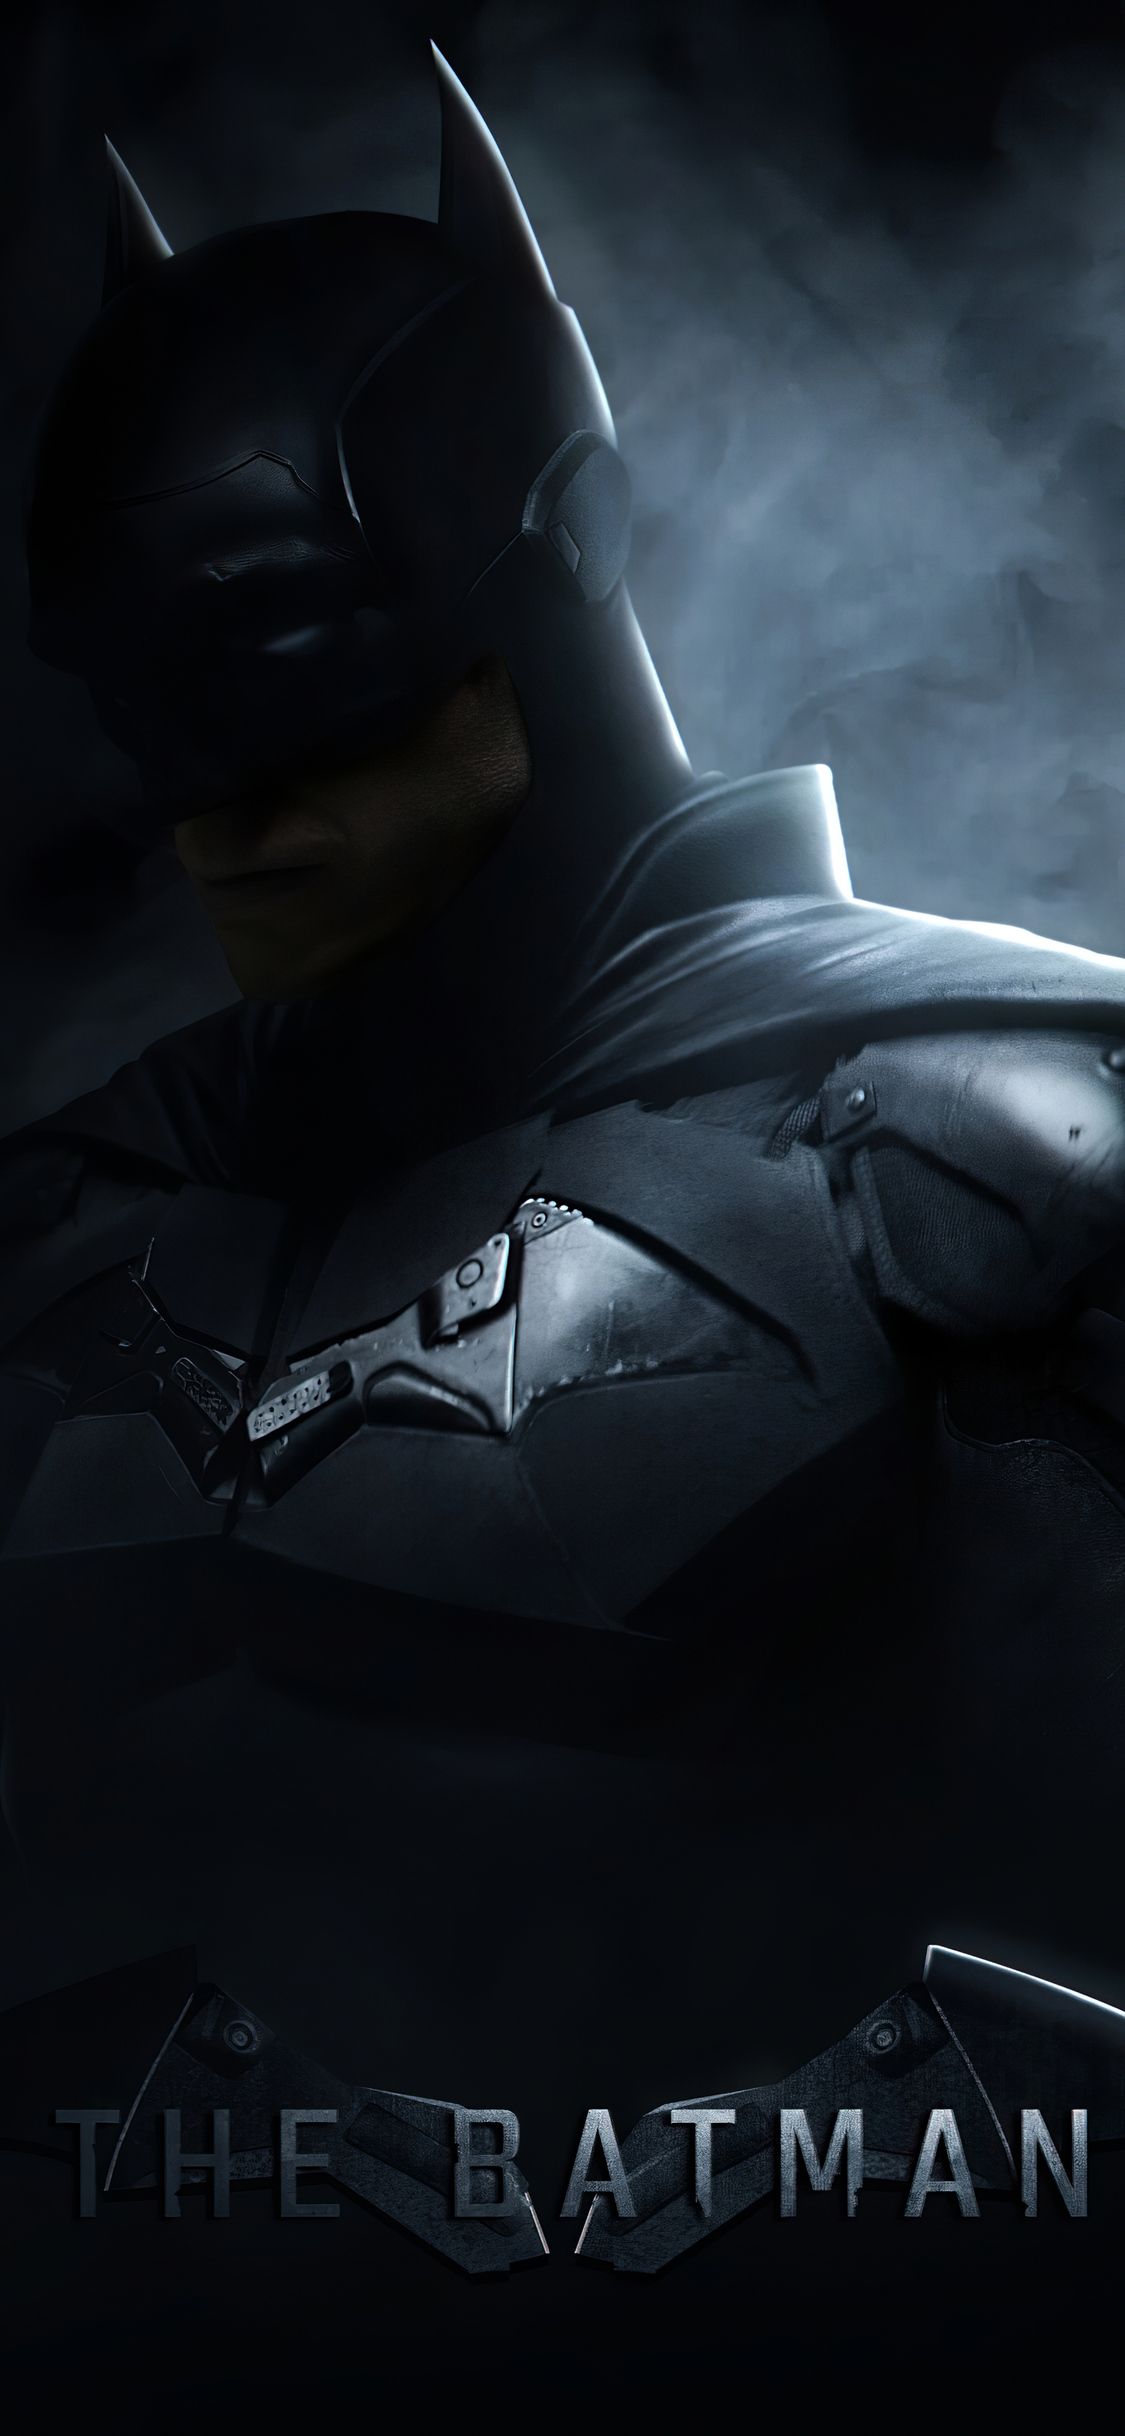 High resolution The Batman wallpapers for mobile (Link in comments